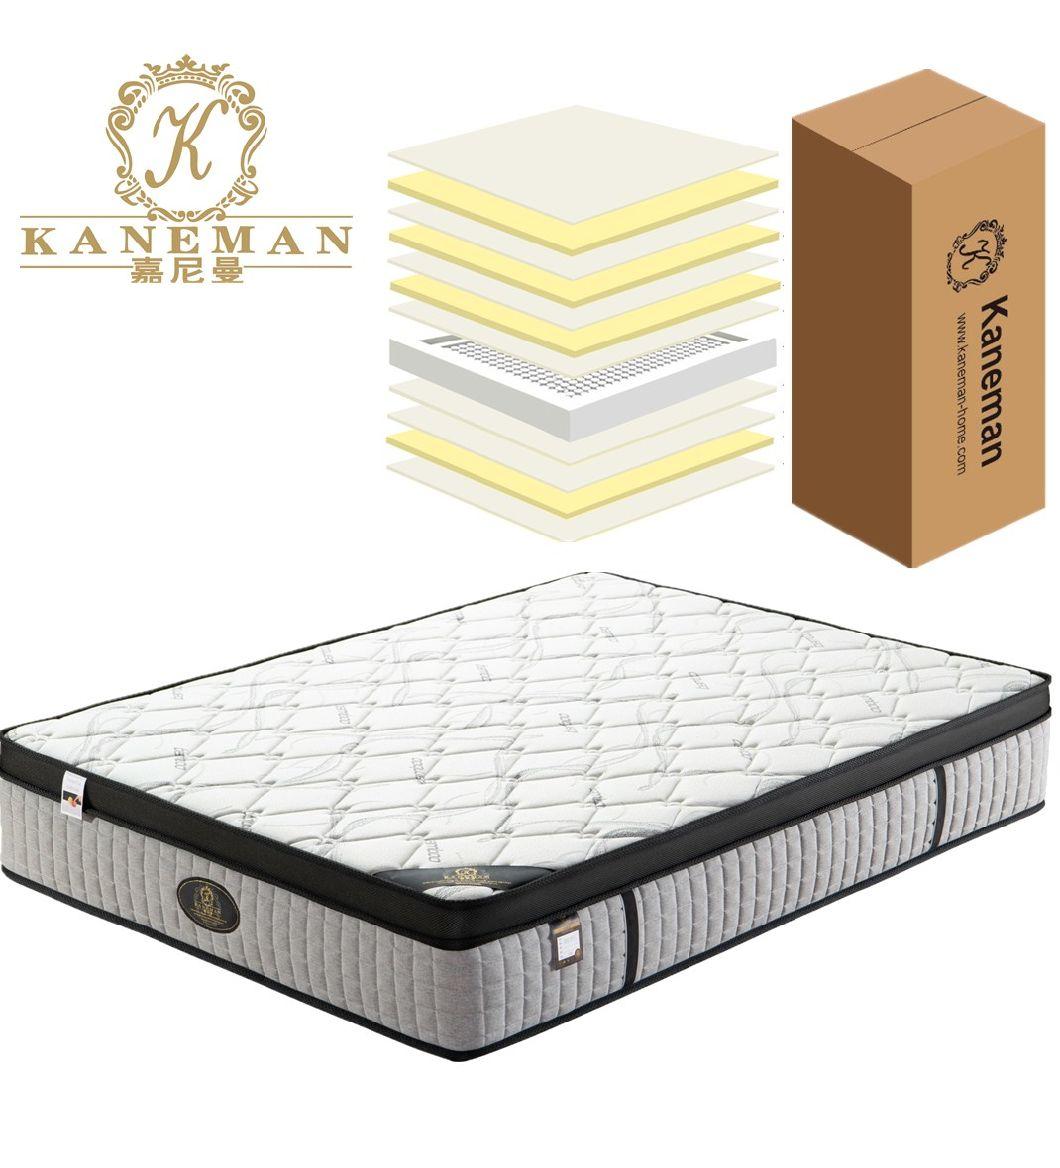 Rolled up Bamboo Fabric Pocket Spring Mattress Bed Mattress in a Box